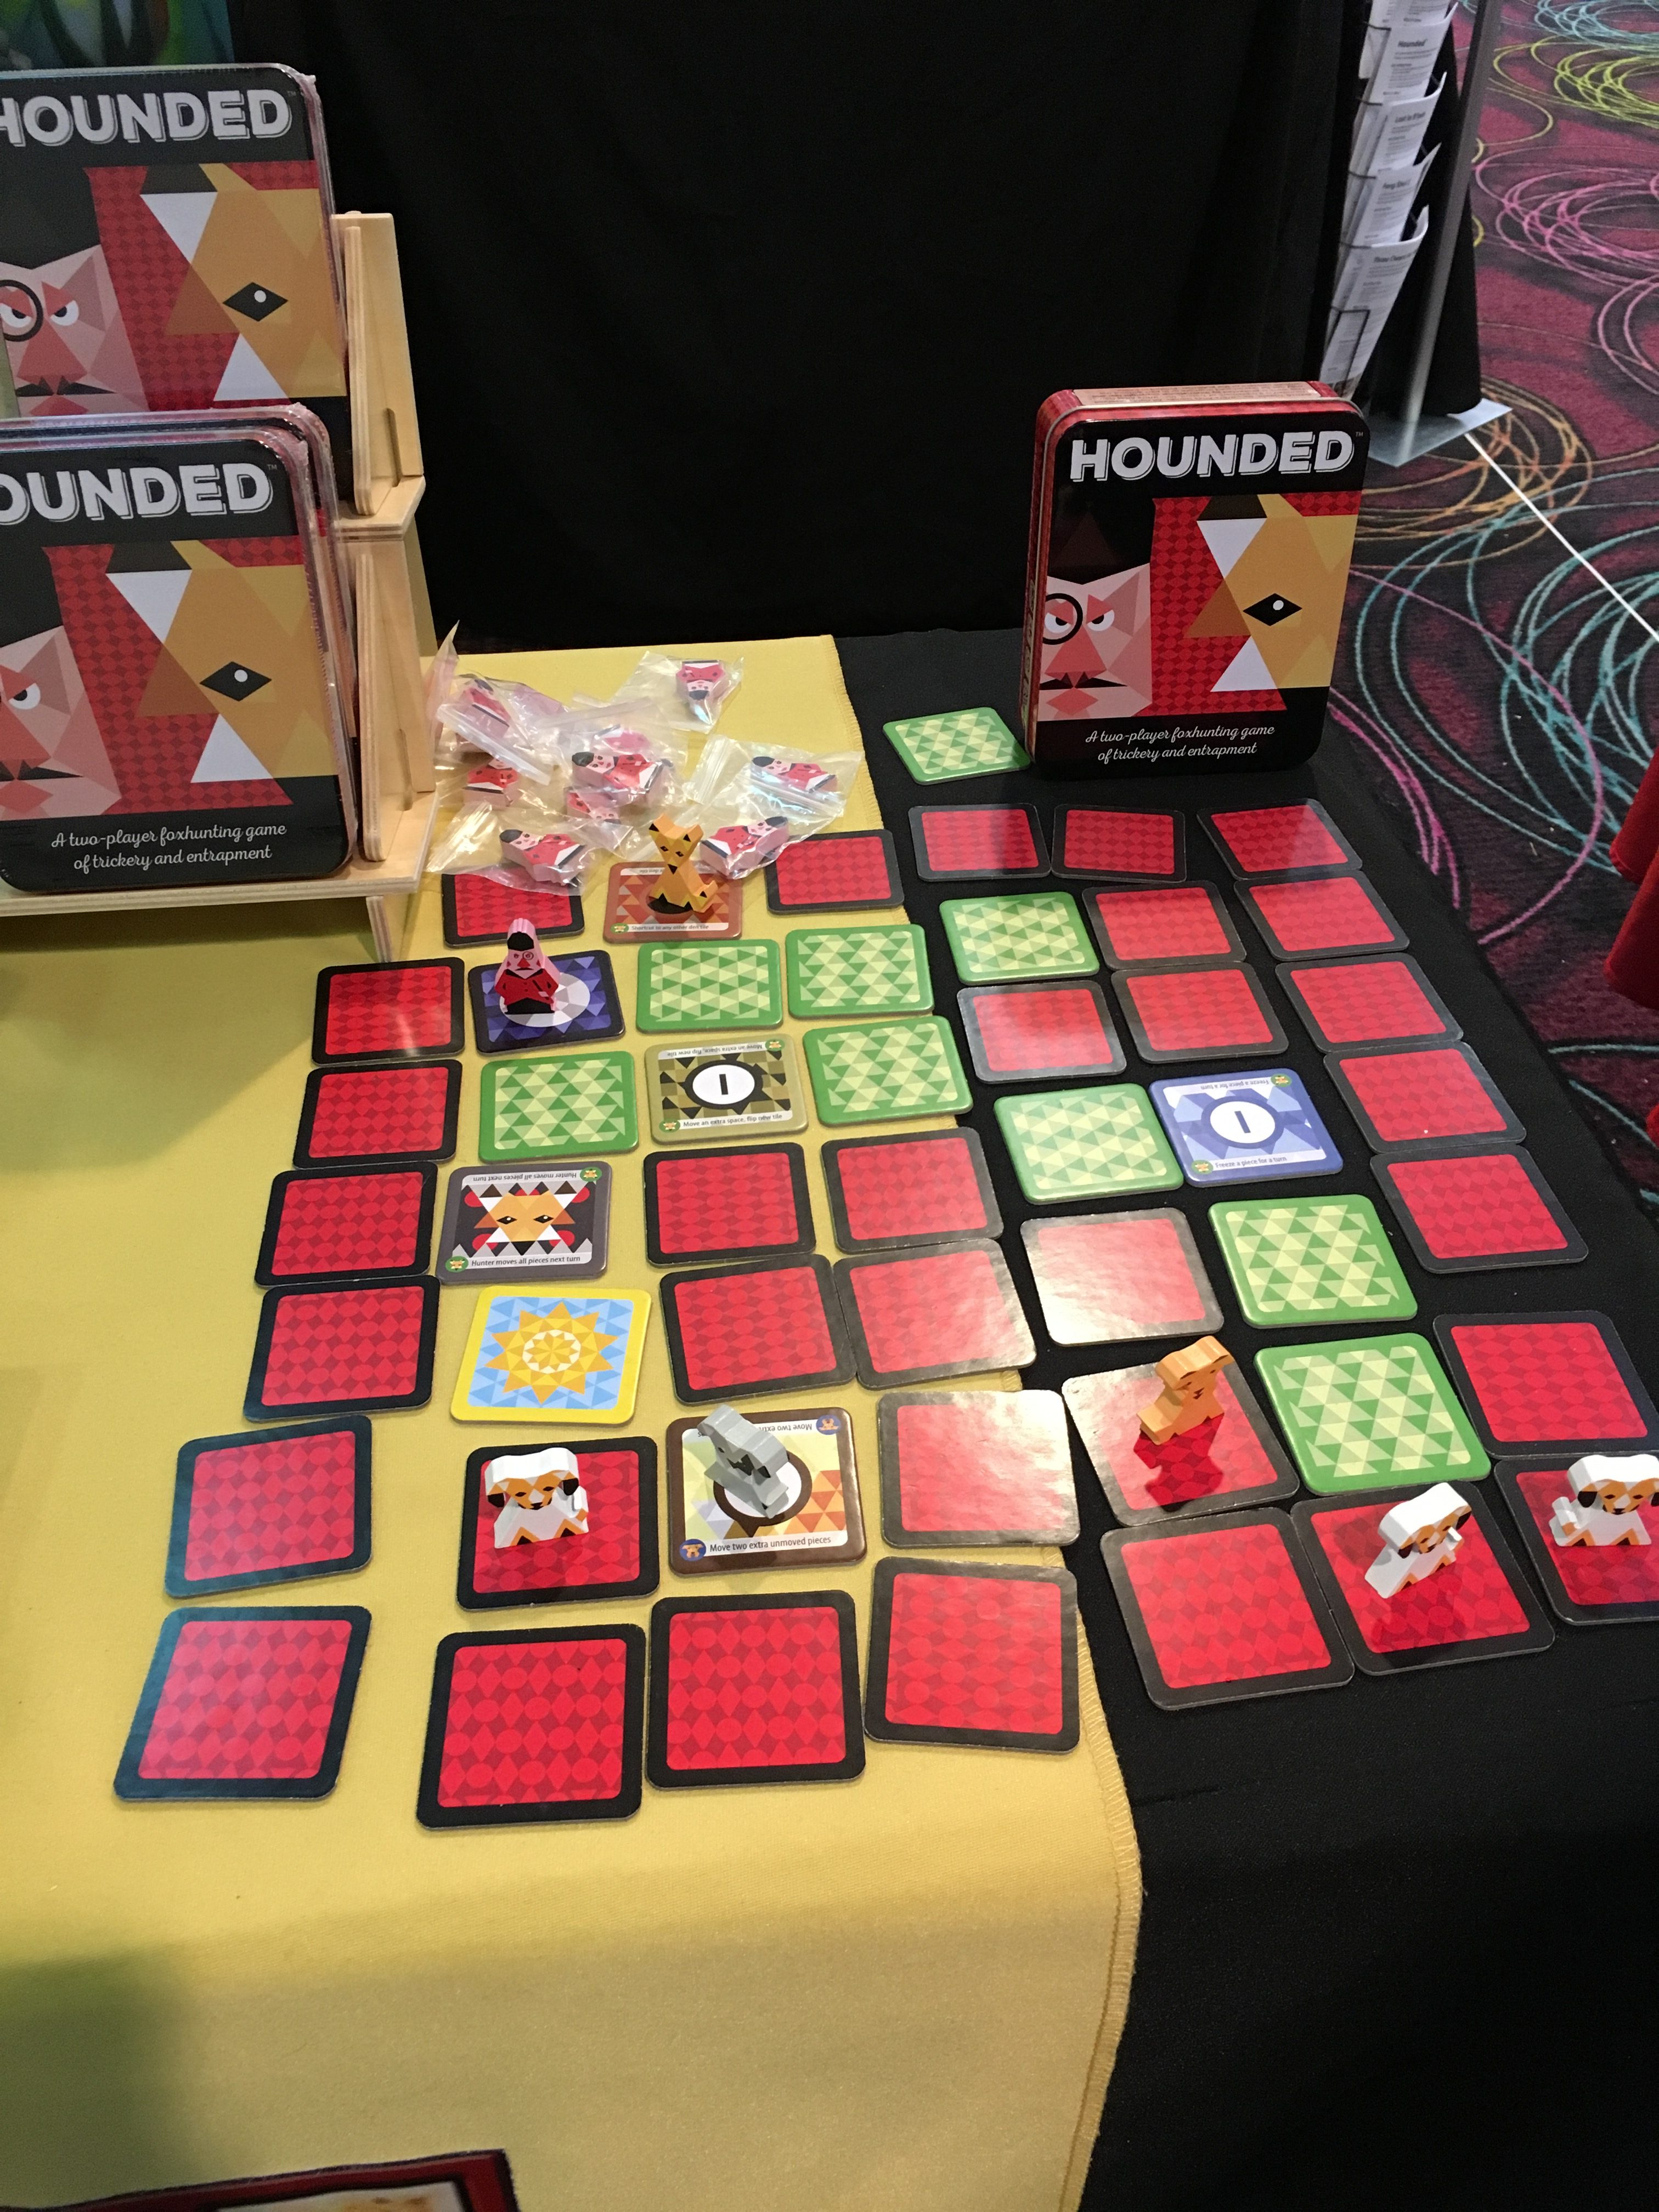 A demo of the game Hounded